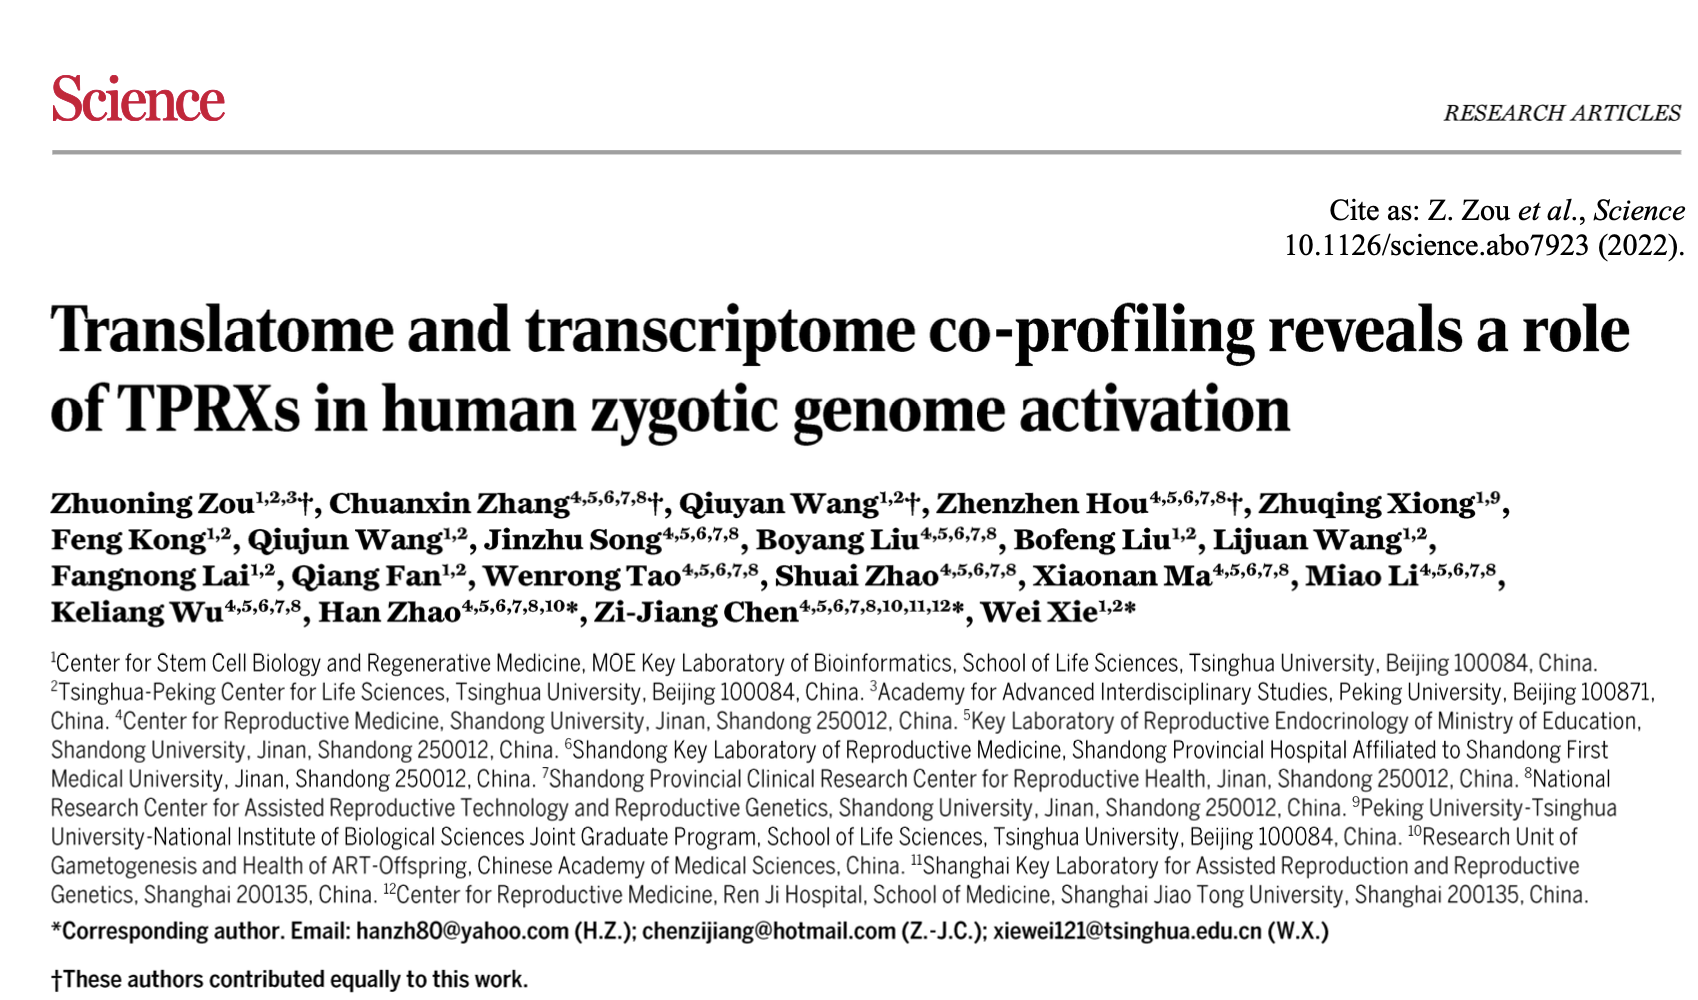 Translatome and transcriptome co-profiling reveals a role of TPRXs in human zygotic genome activation